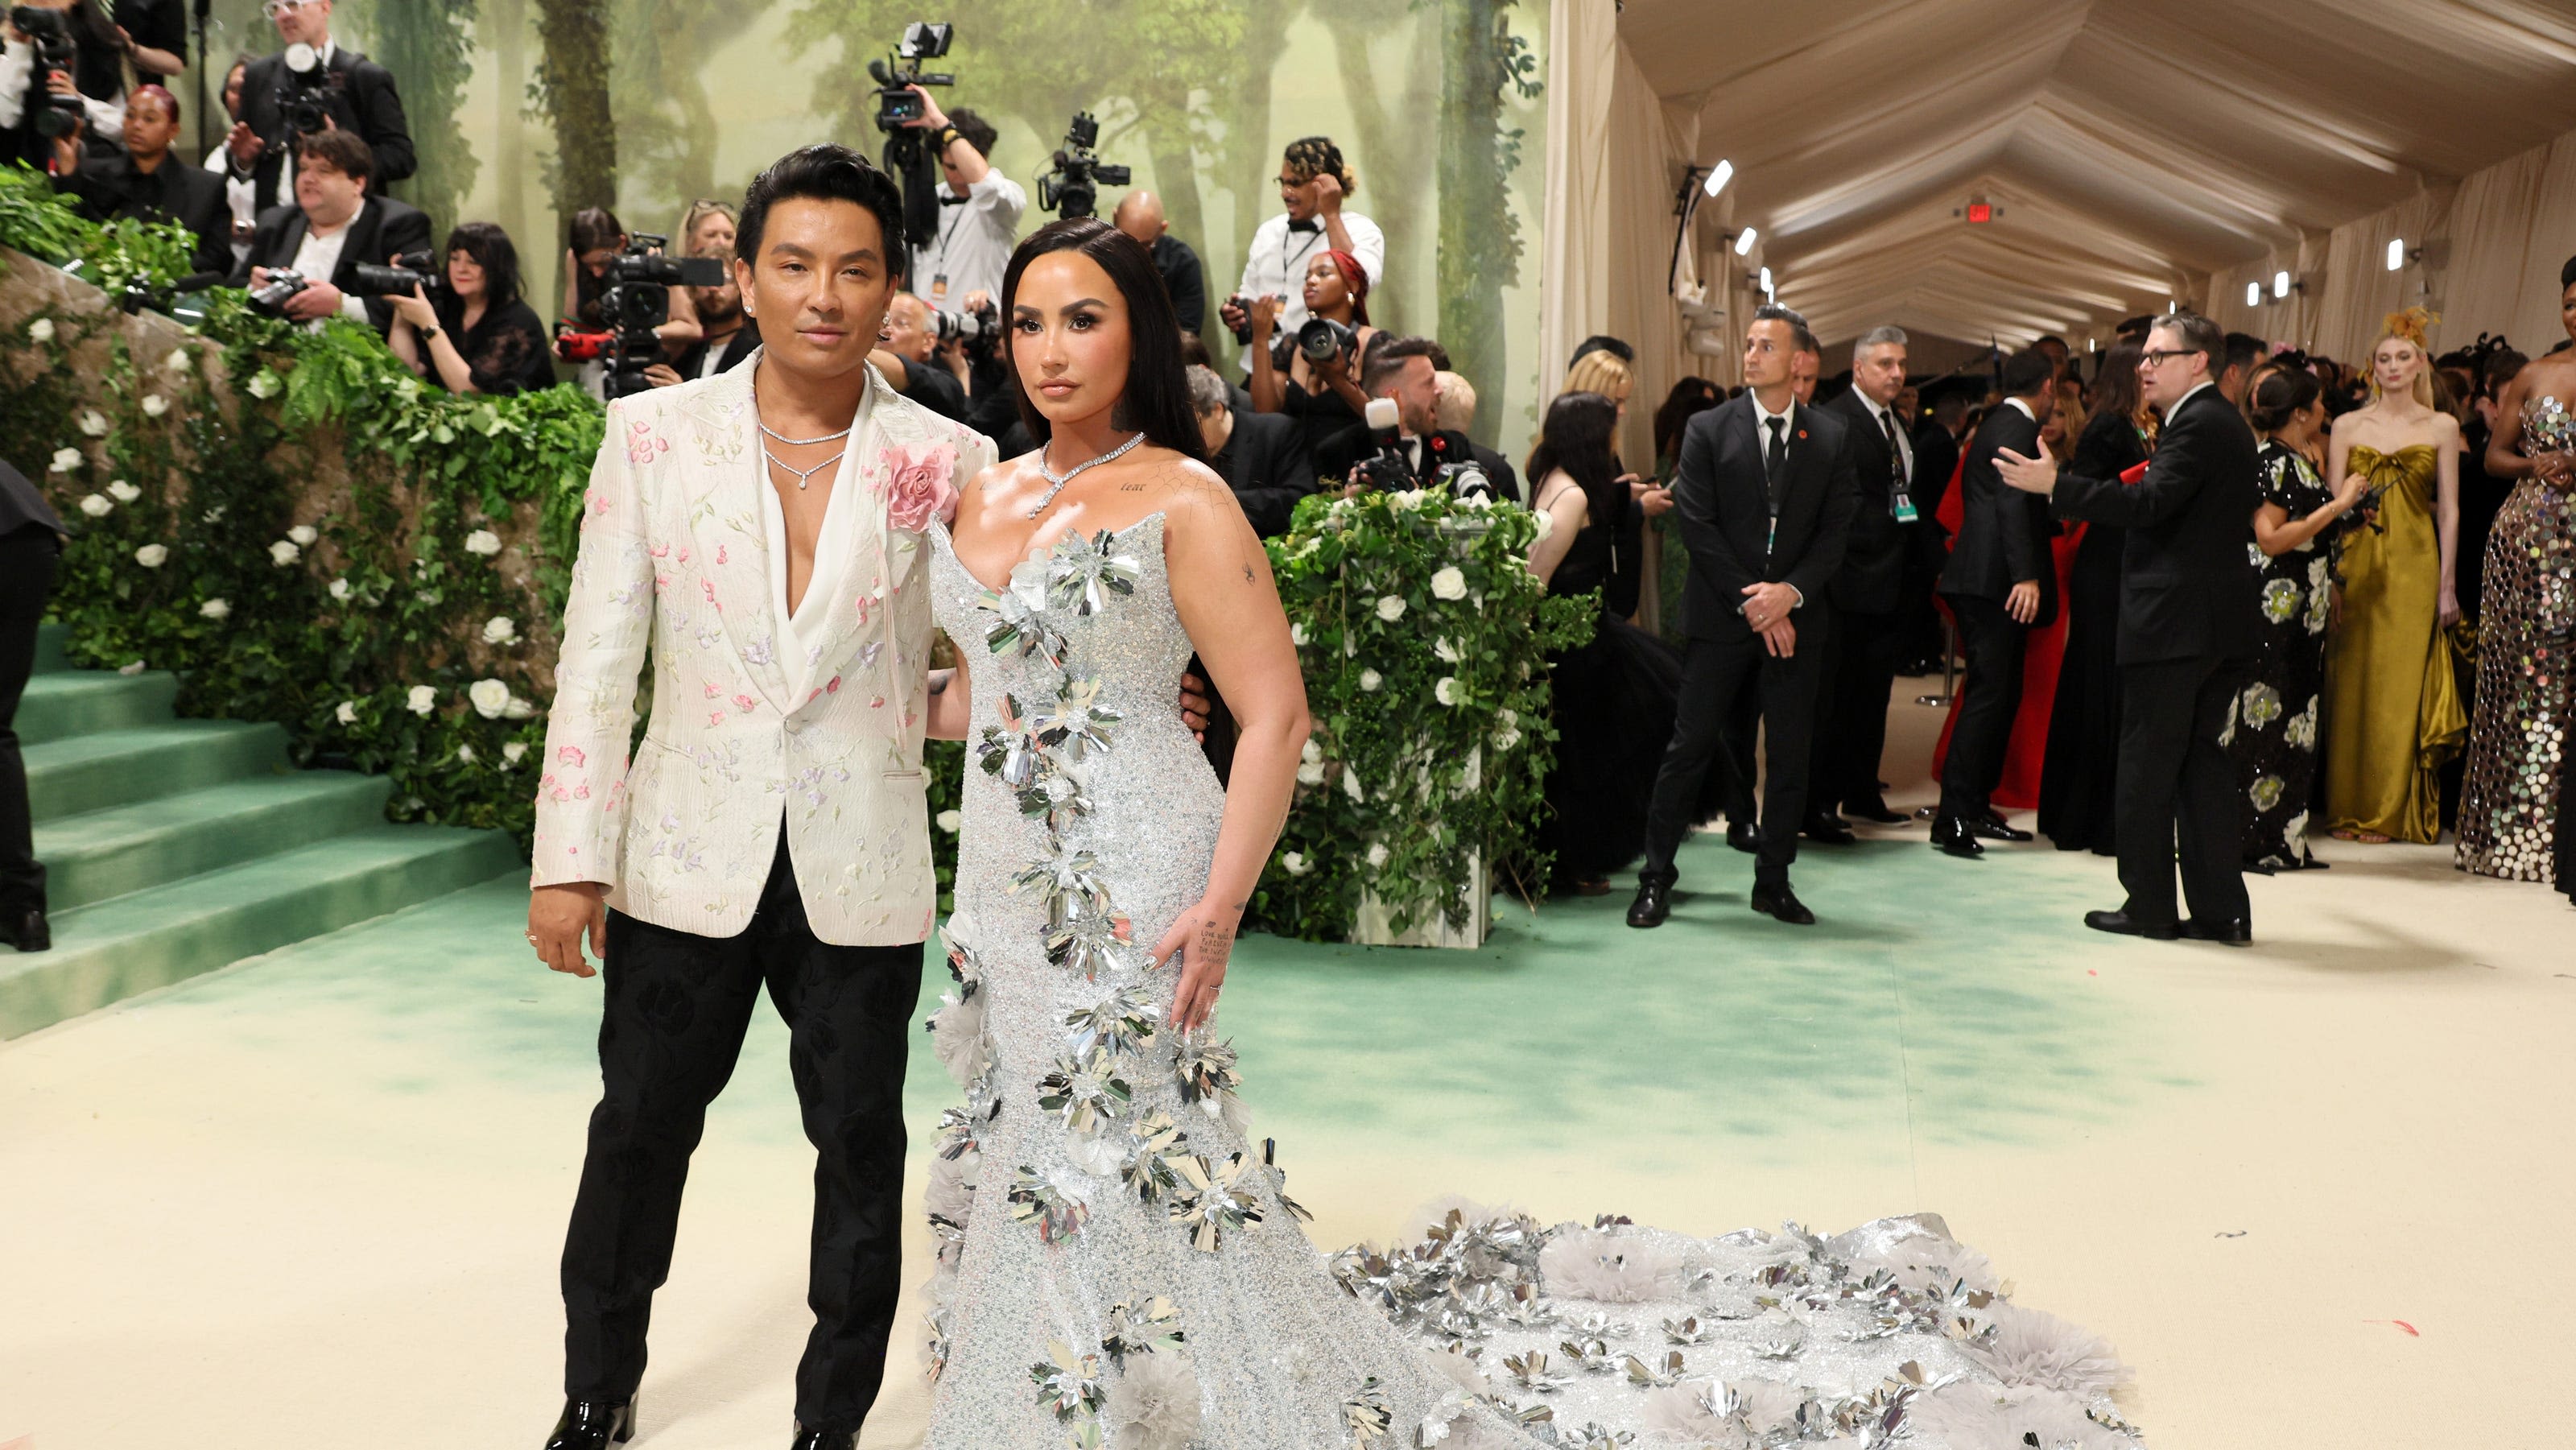 Demi Lovato marks Met Gala return in Prabal Gurung gown with 500 hand-cut flowers